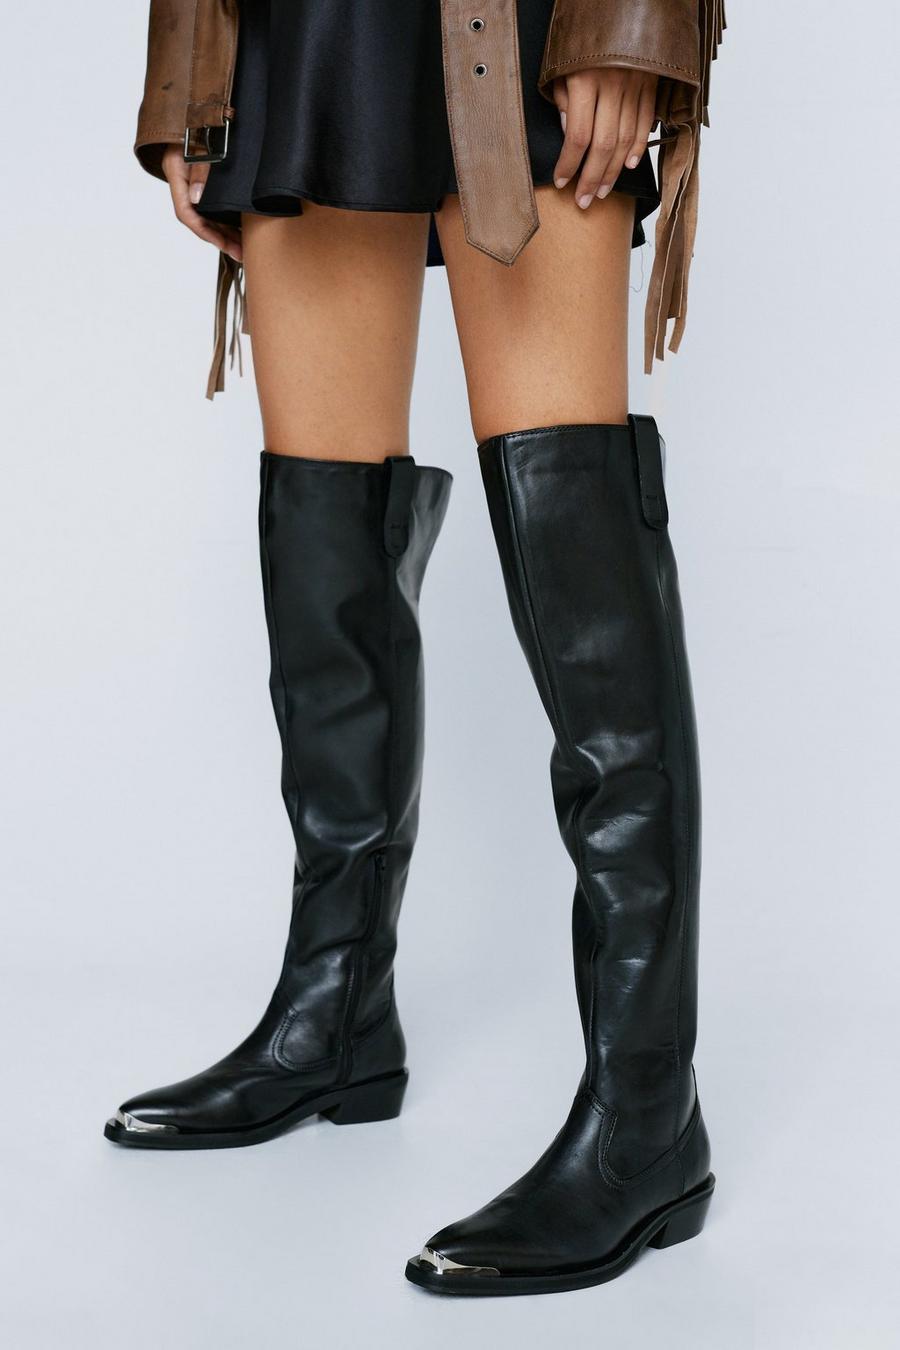 Real Leather Thigh High Metal Western Boots